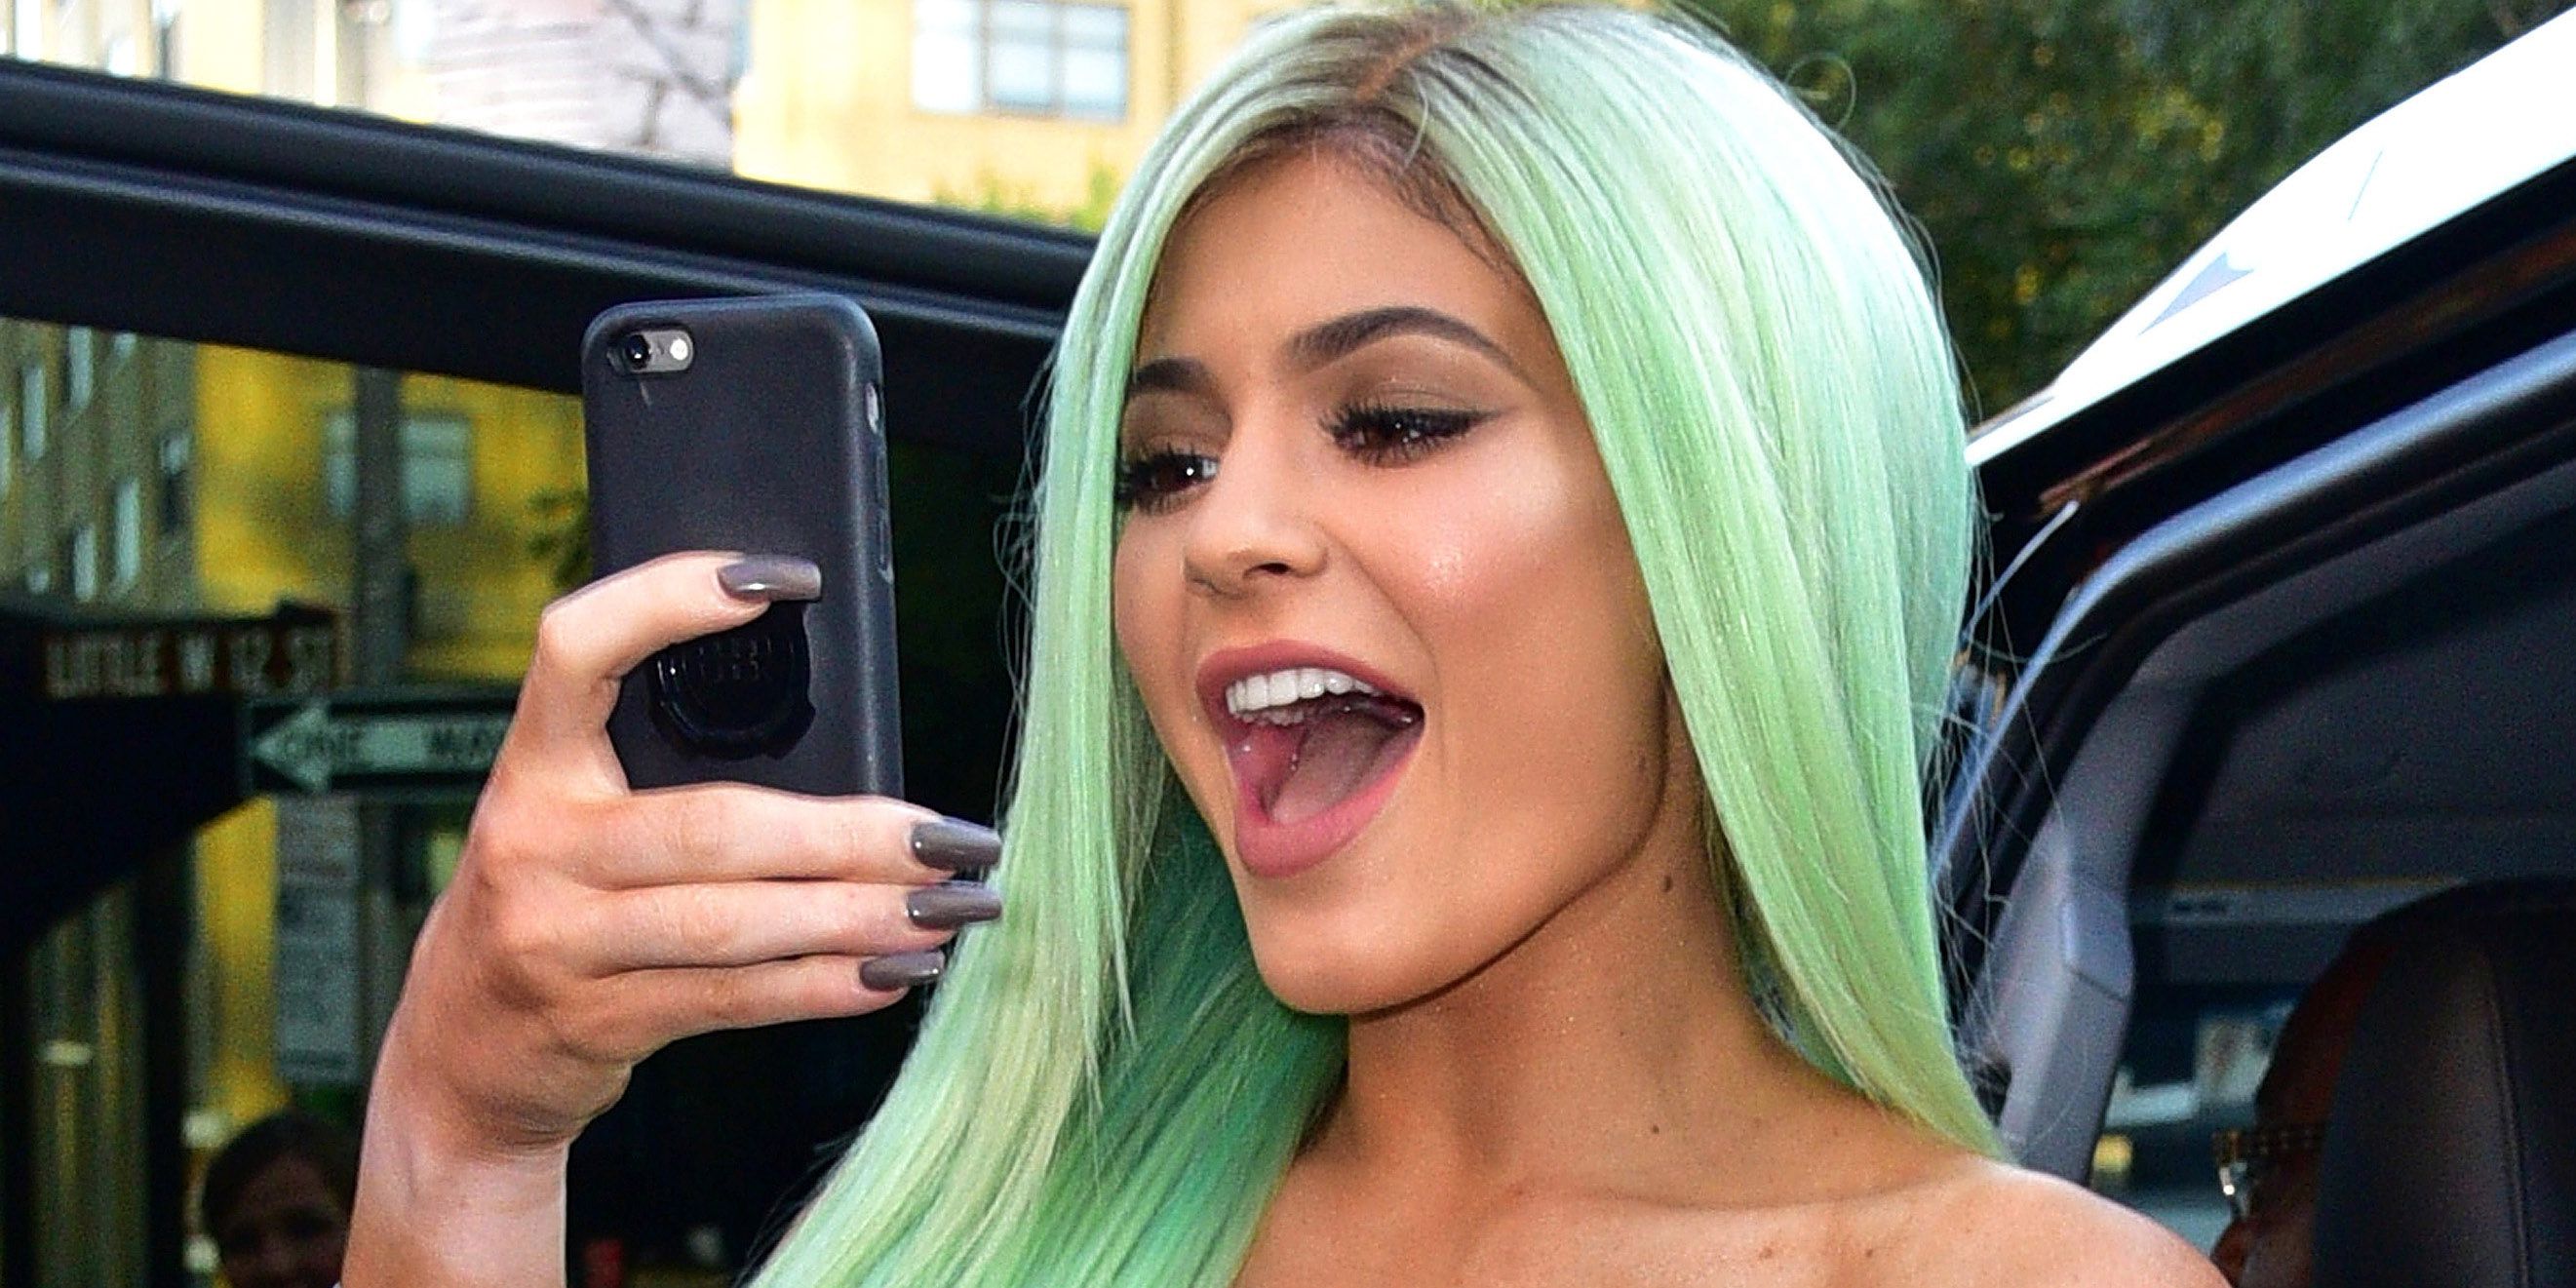 Kylie Jenner launches new lipstick Instagram filter